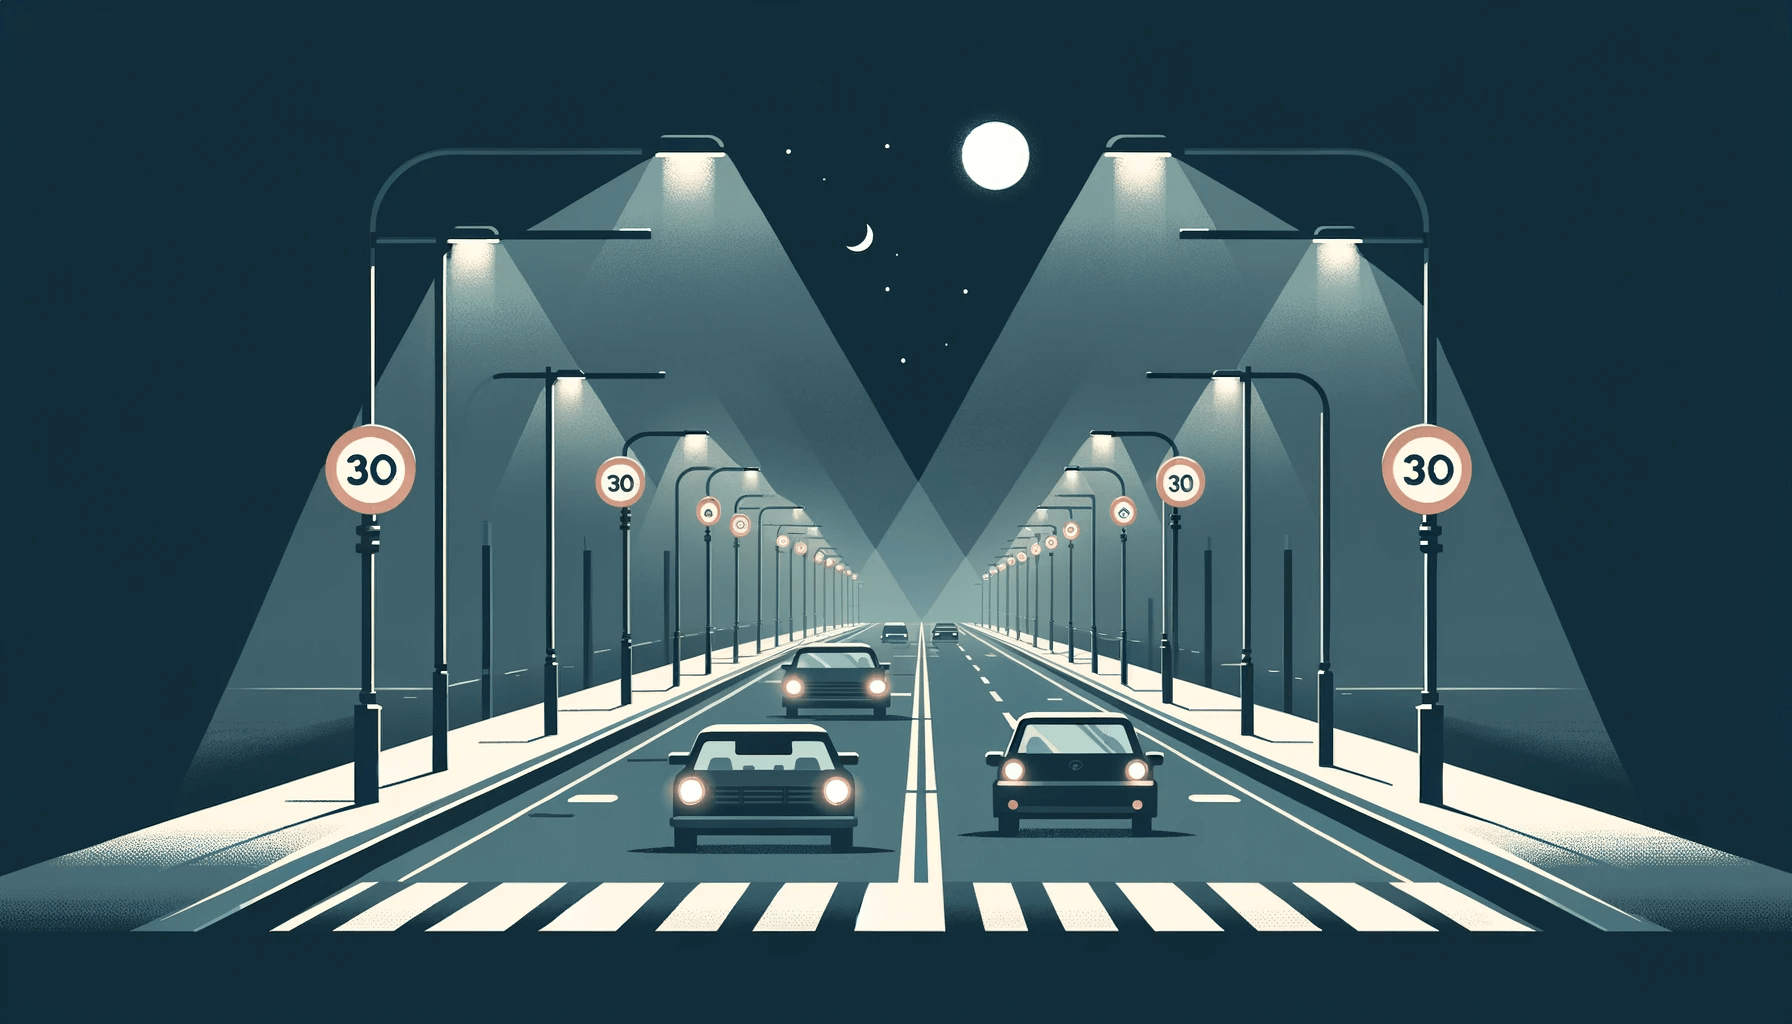 Graphic of cars driving at night with street lamps and speed limit signs